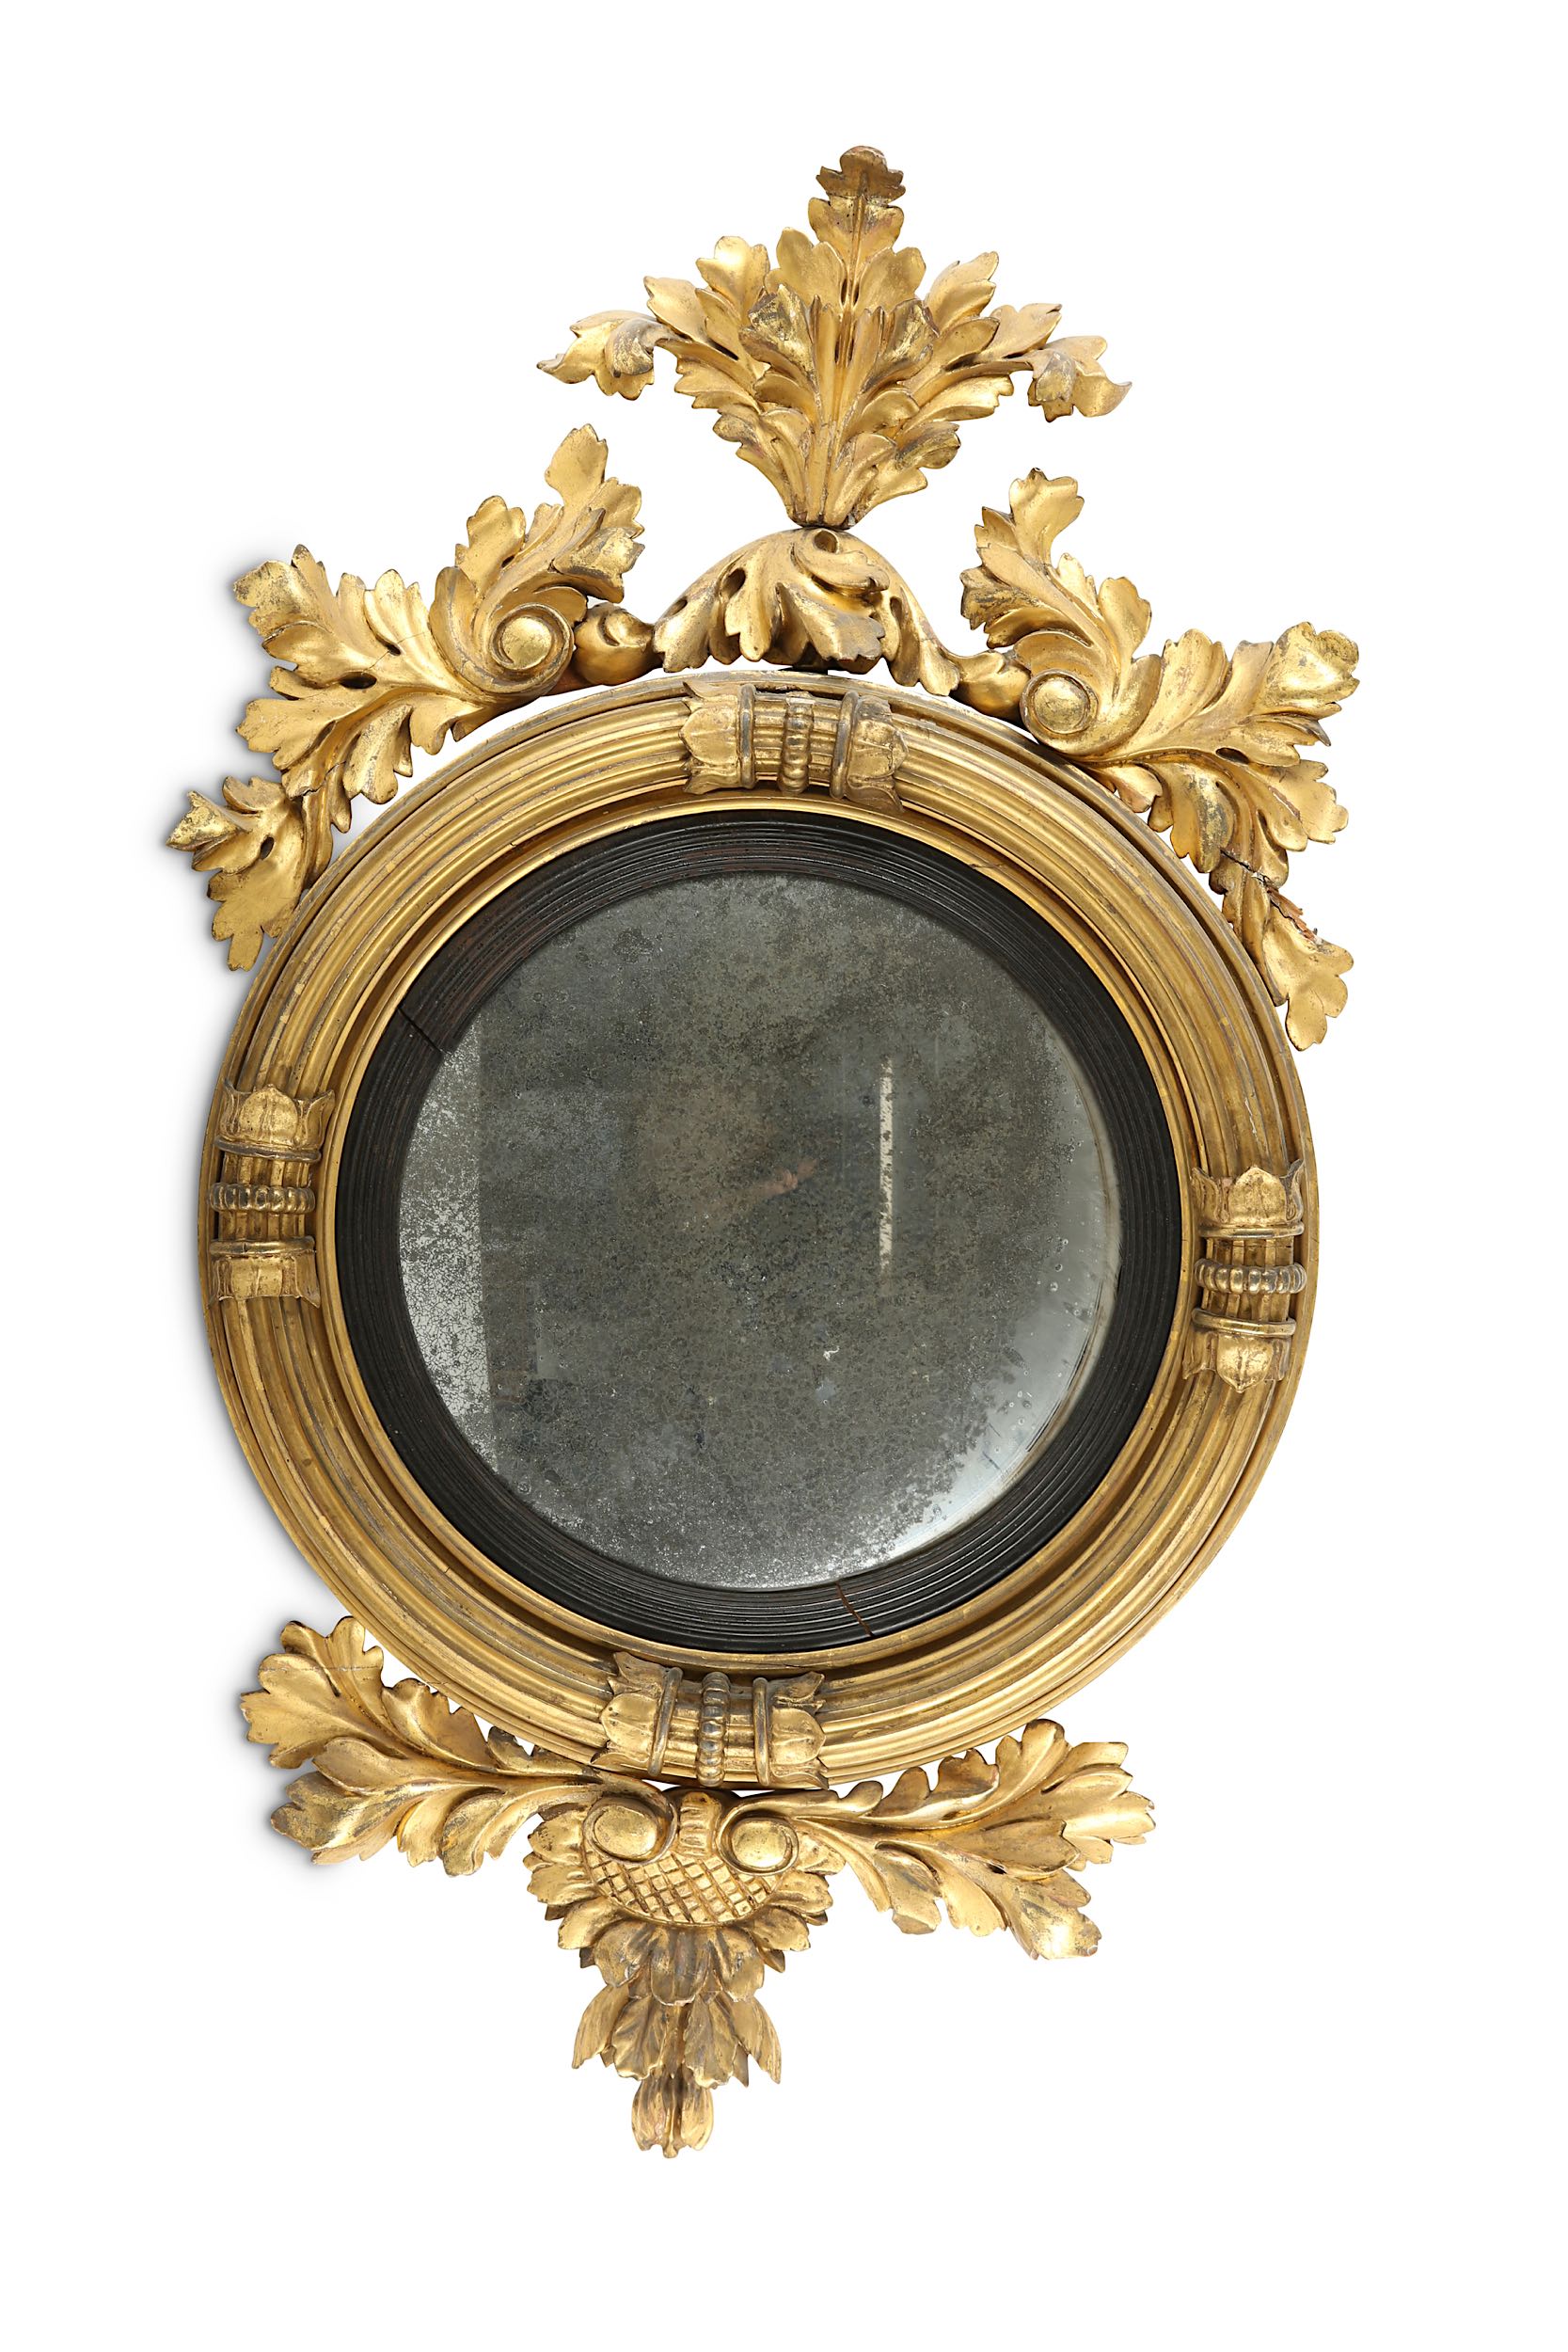 A Regency circular convex mirror with a carved giltwood frame